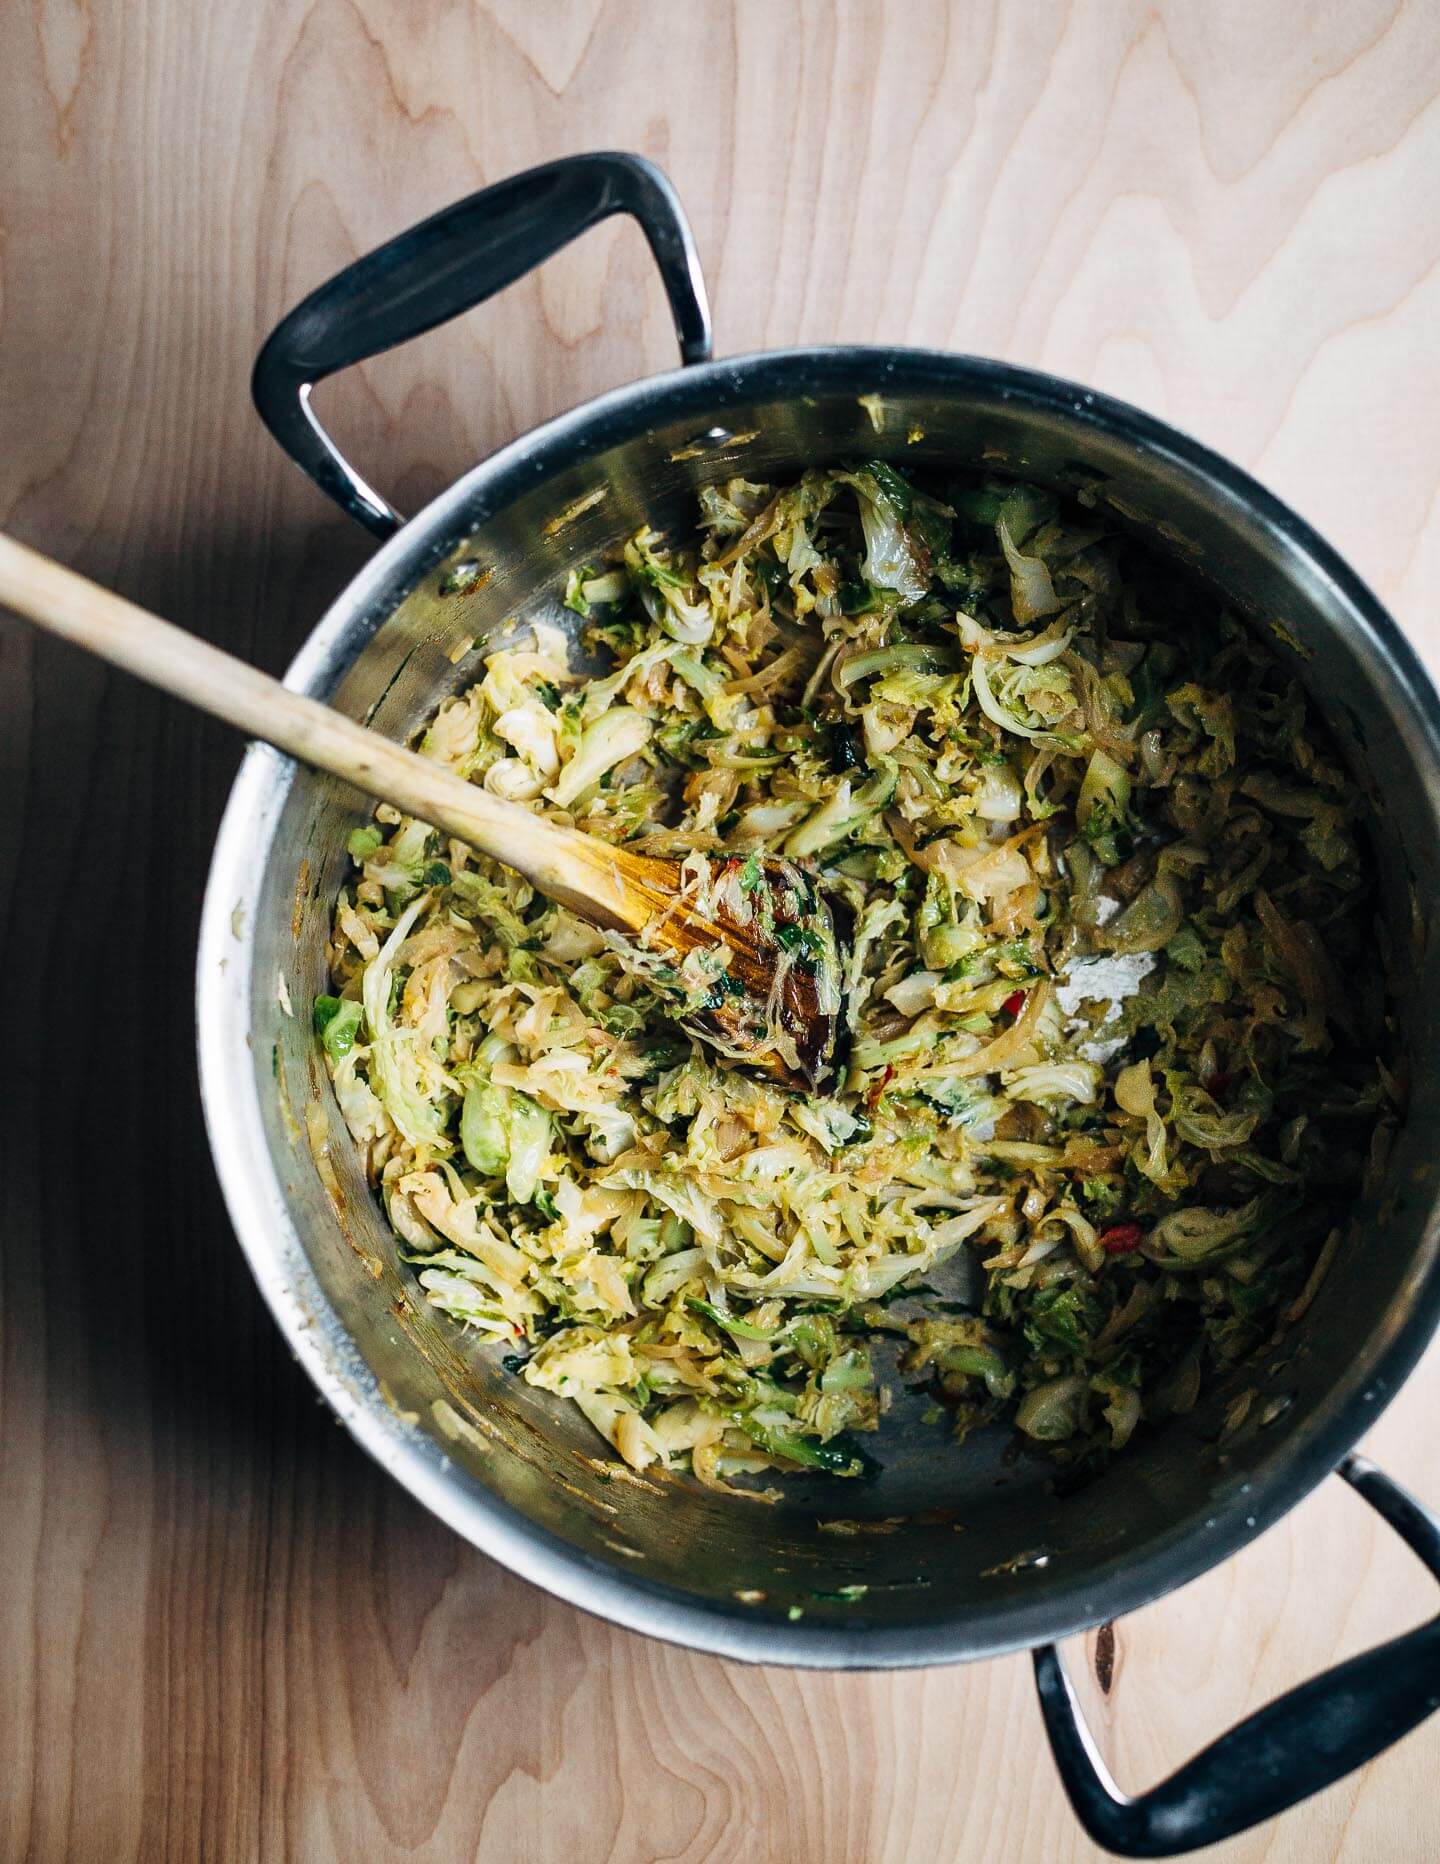 Caramelized onions, cabbage, and Brussels sprouts. 